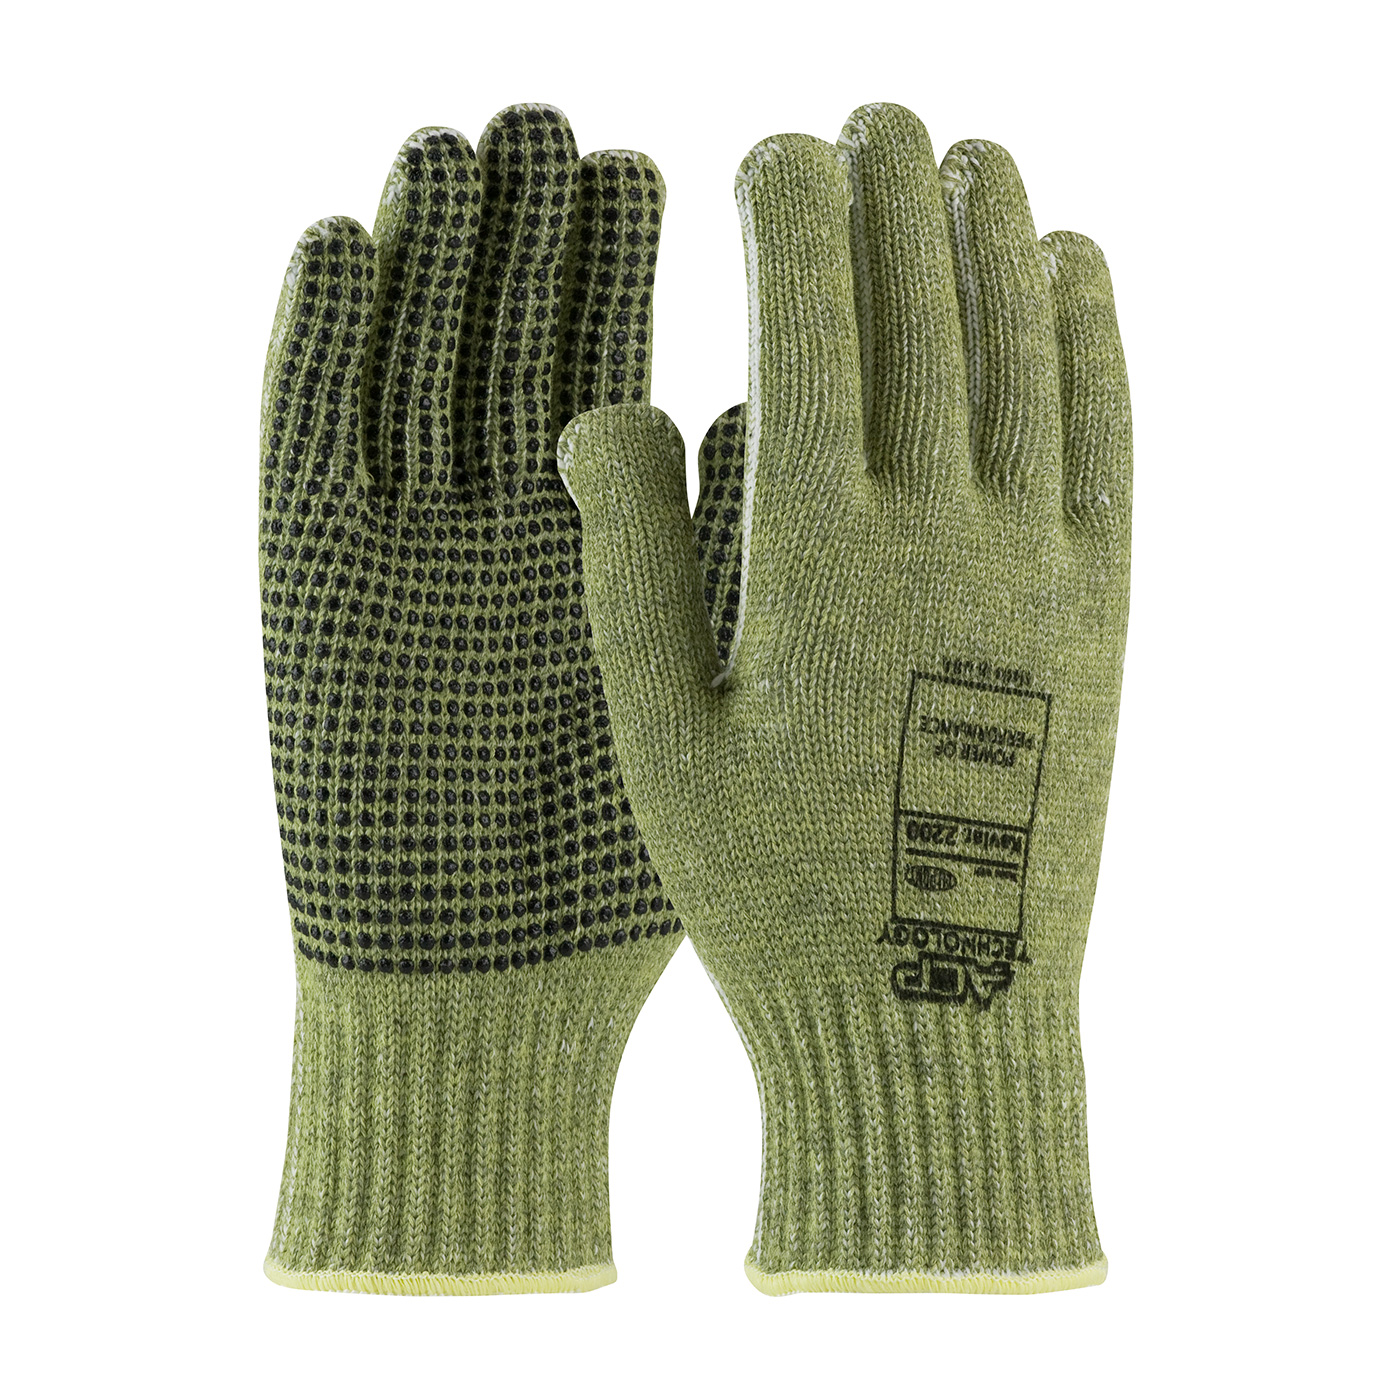 08-KA740PD PIP®  ACP Technology™ Economy Weight Kevlar® Glove w/ Polyester Lining and Green PVC Dot Grip 